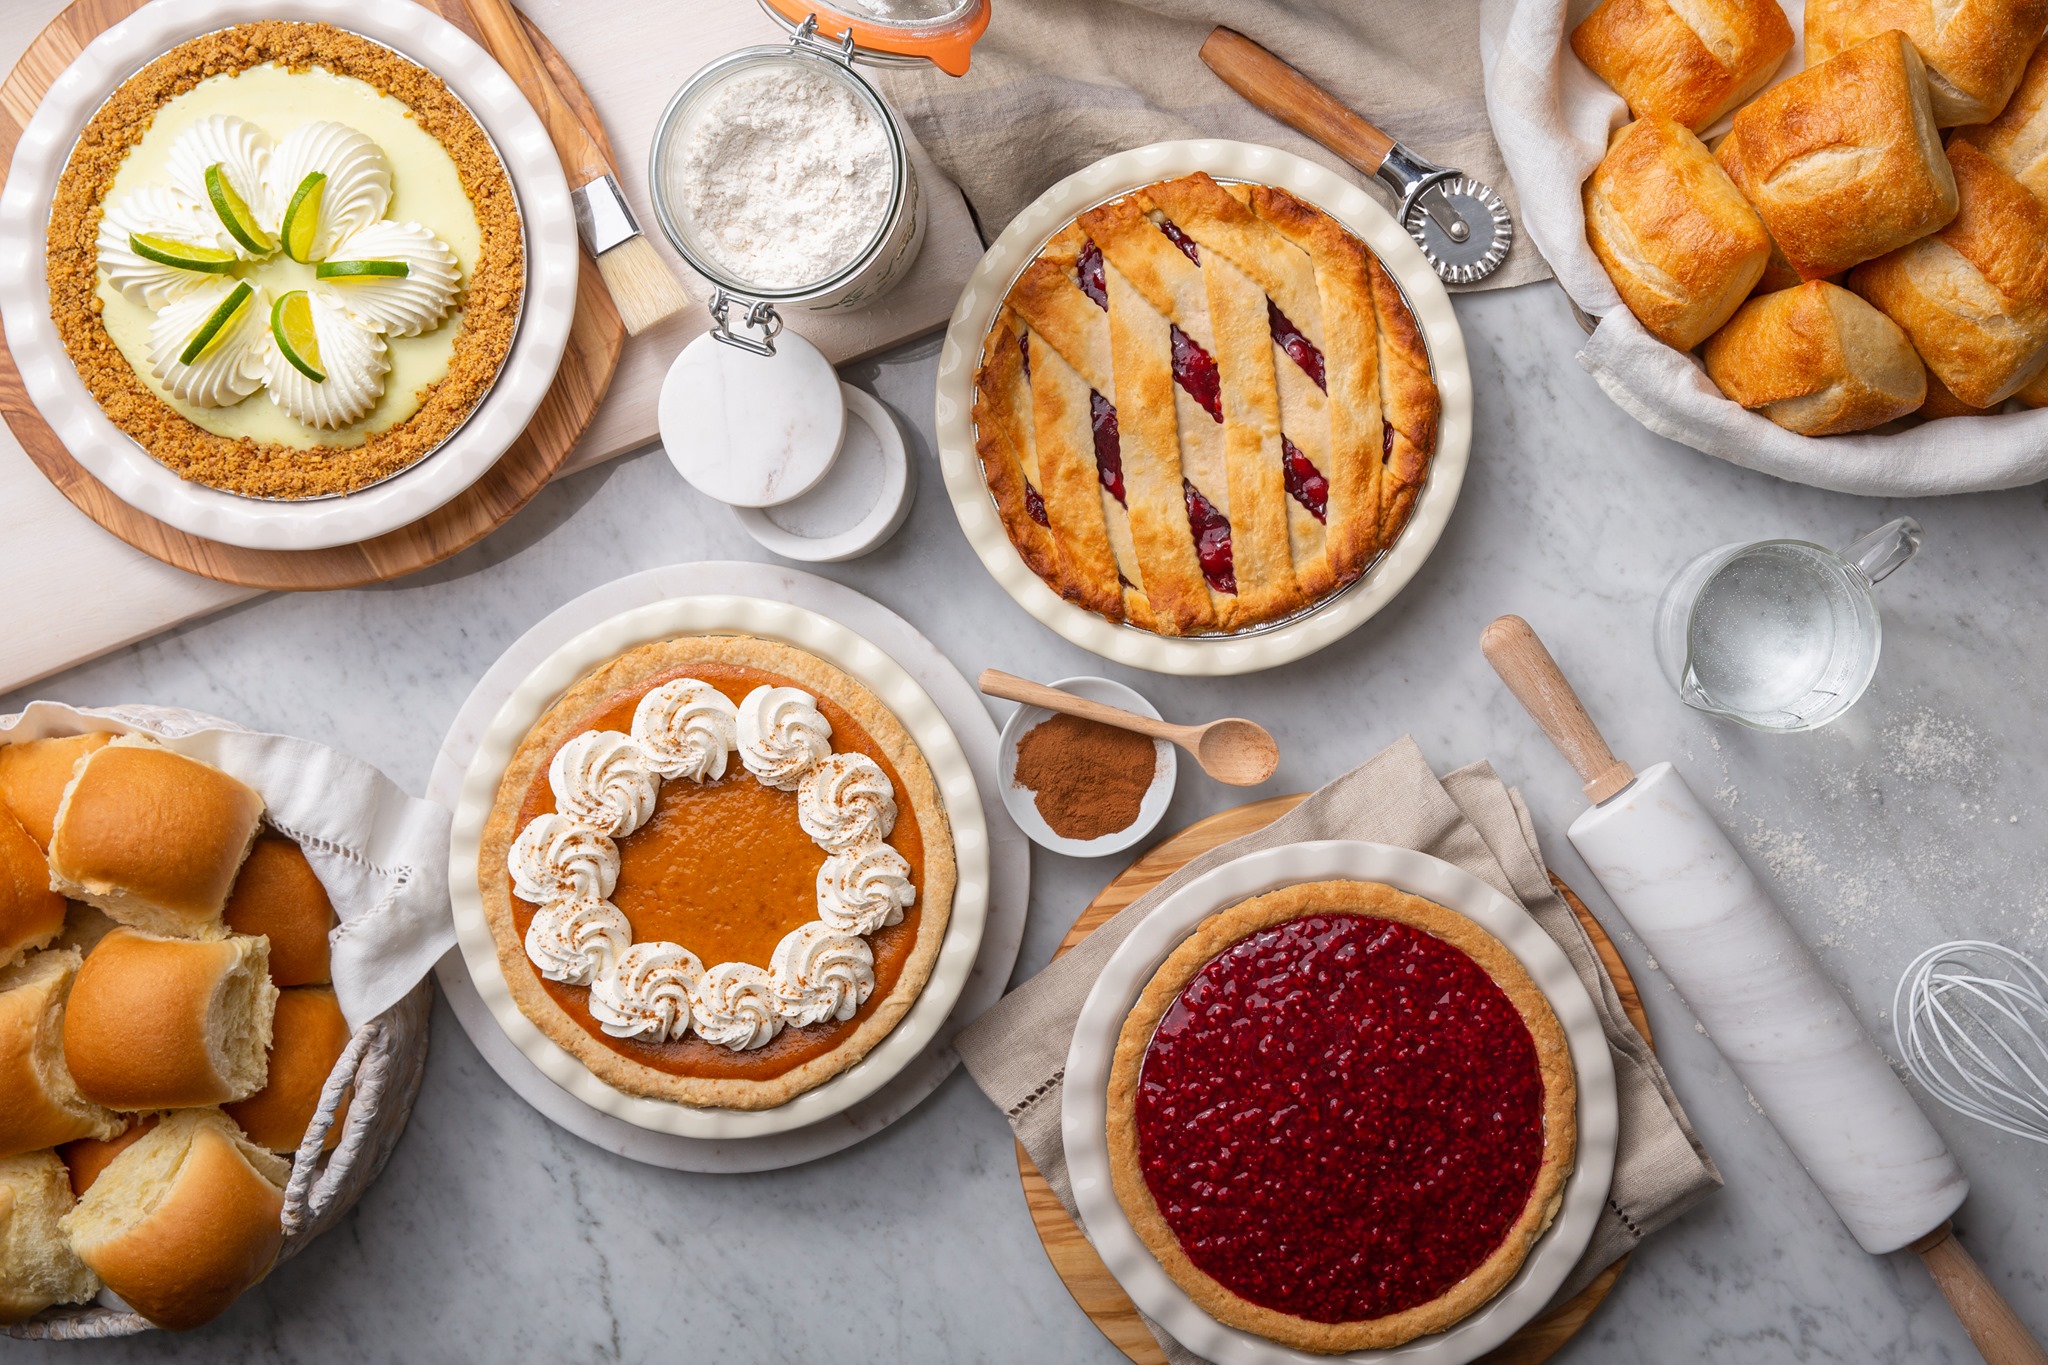 Pie options at Kneaders Bakery and Cafe